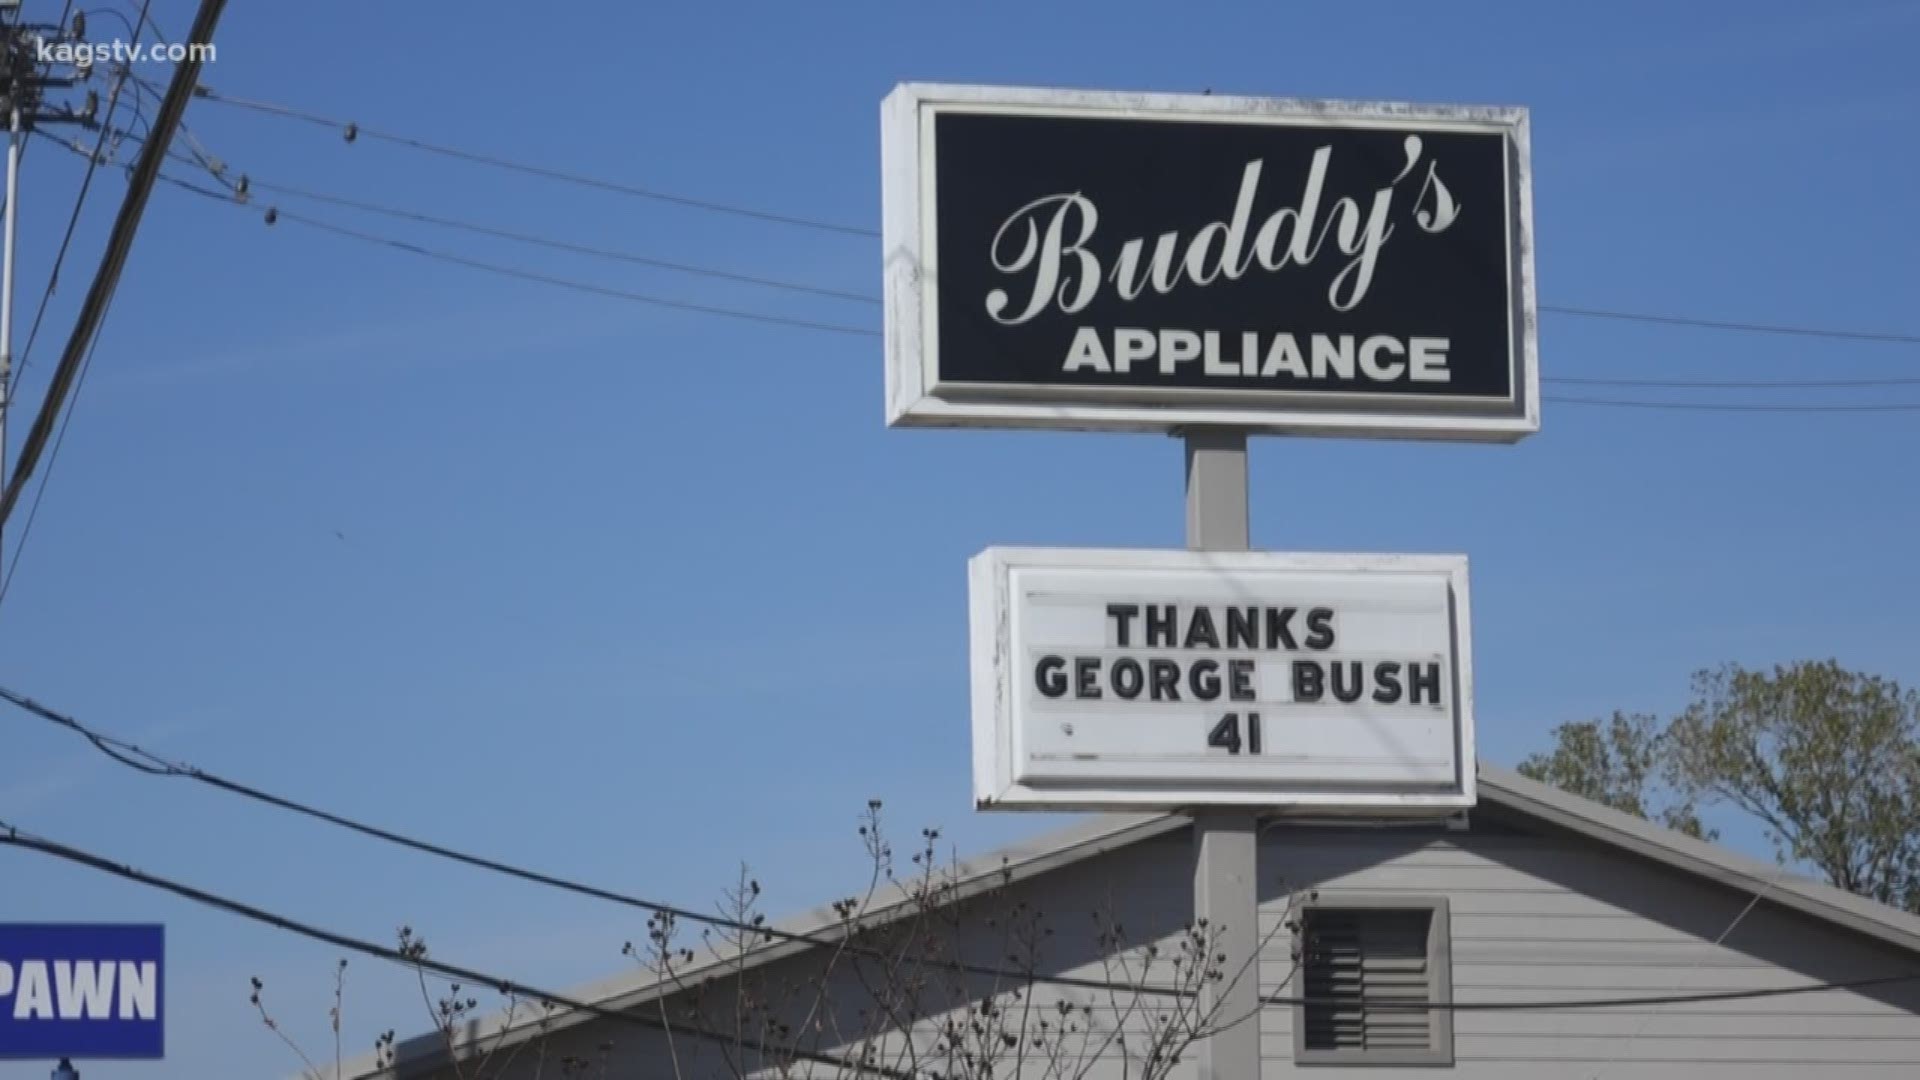 President Bush meant a lot to this community and we've seen memorials to him spring up around town both big and small.